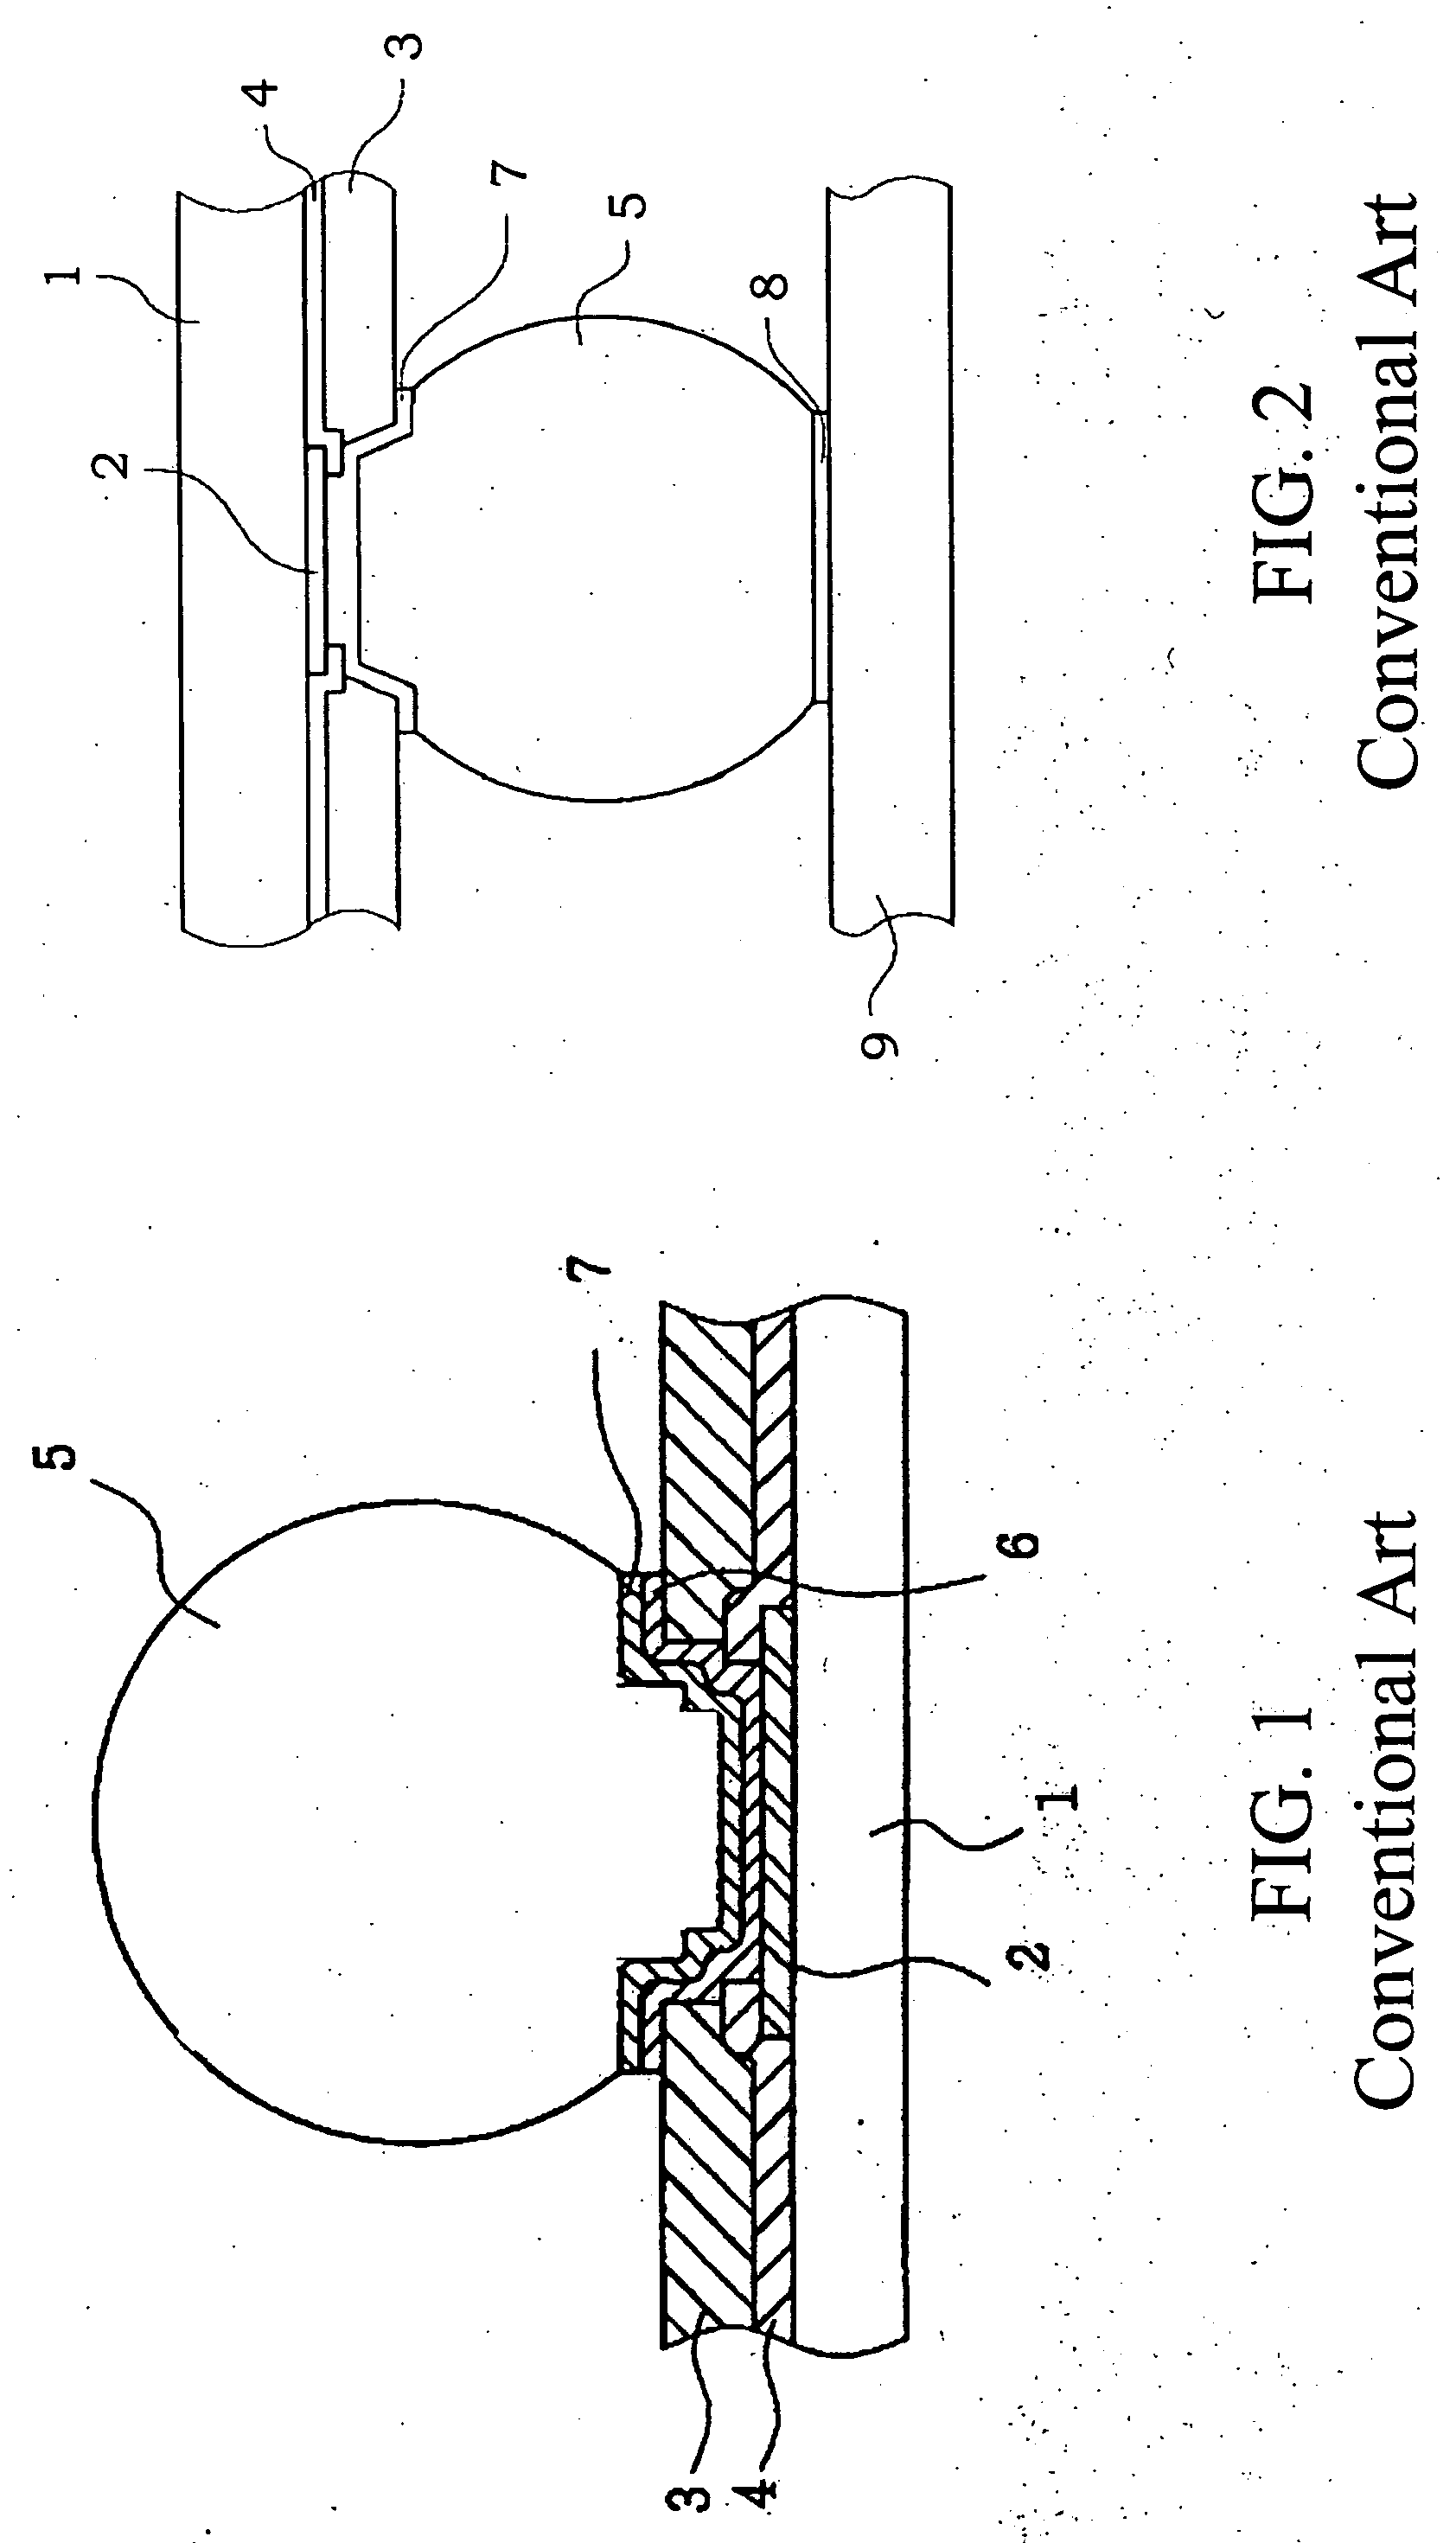 Reinforced solder bump structure and method for forming a reinforced solder bump